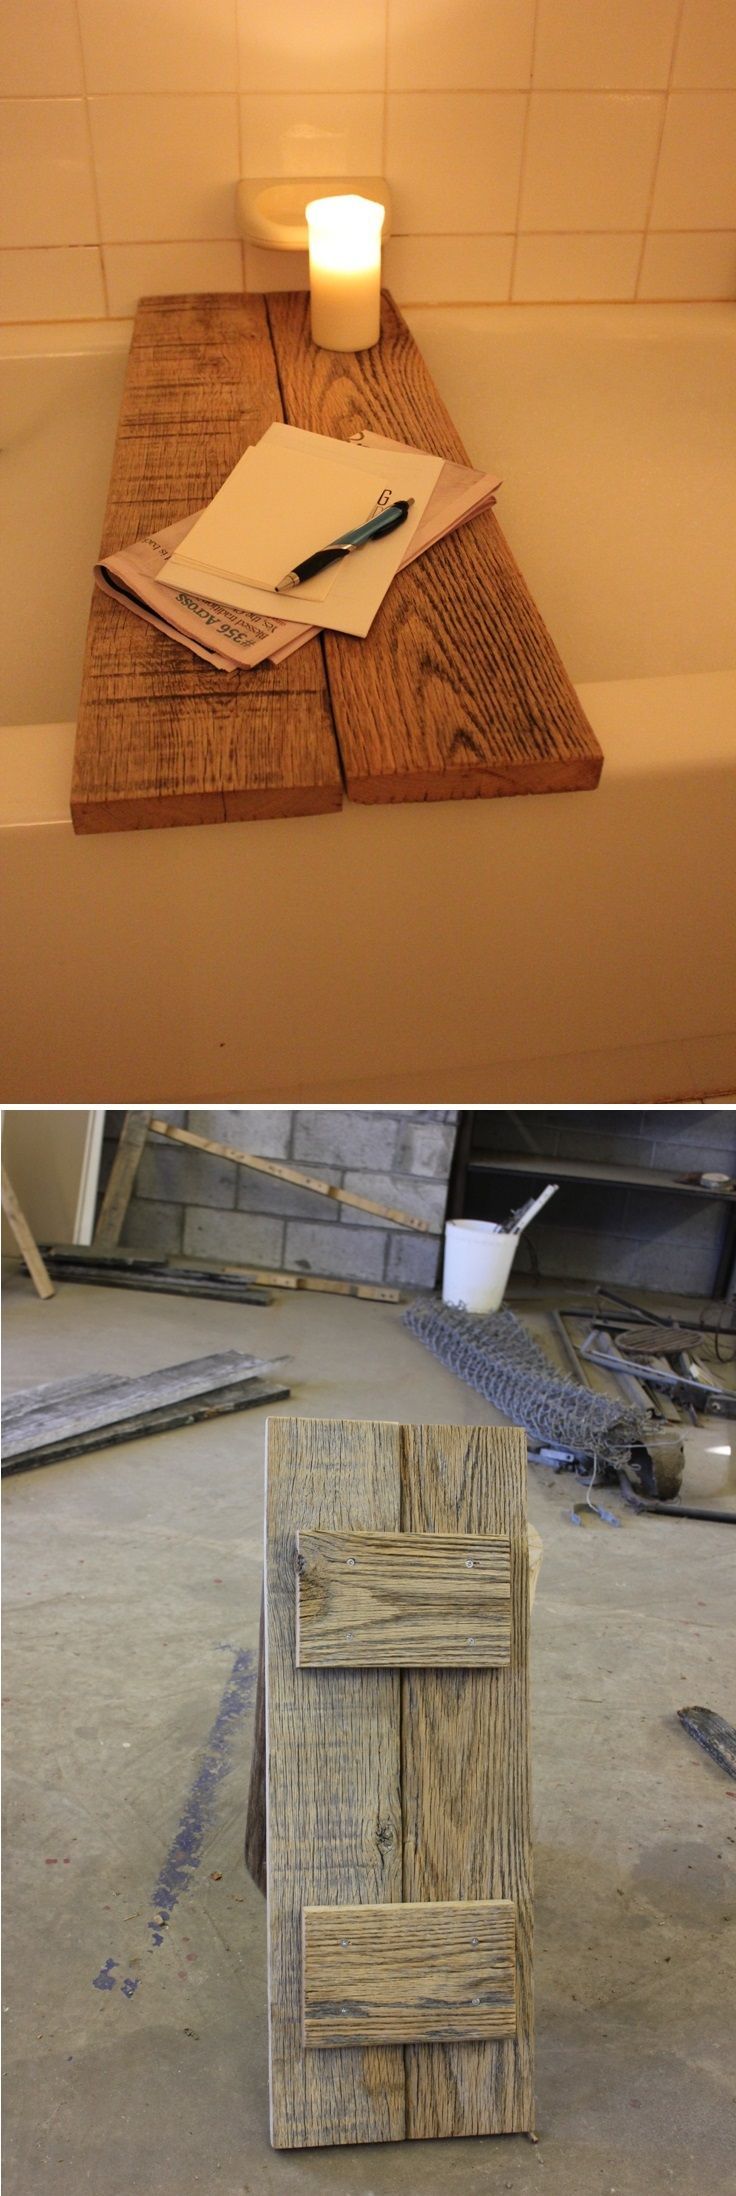 Bubble Time: DIY Reclaimed Oak Bathtub Caddy – Let Alan know I found projects! @